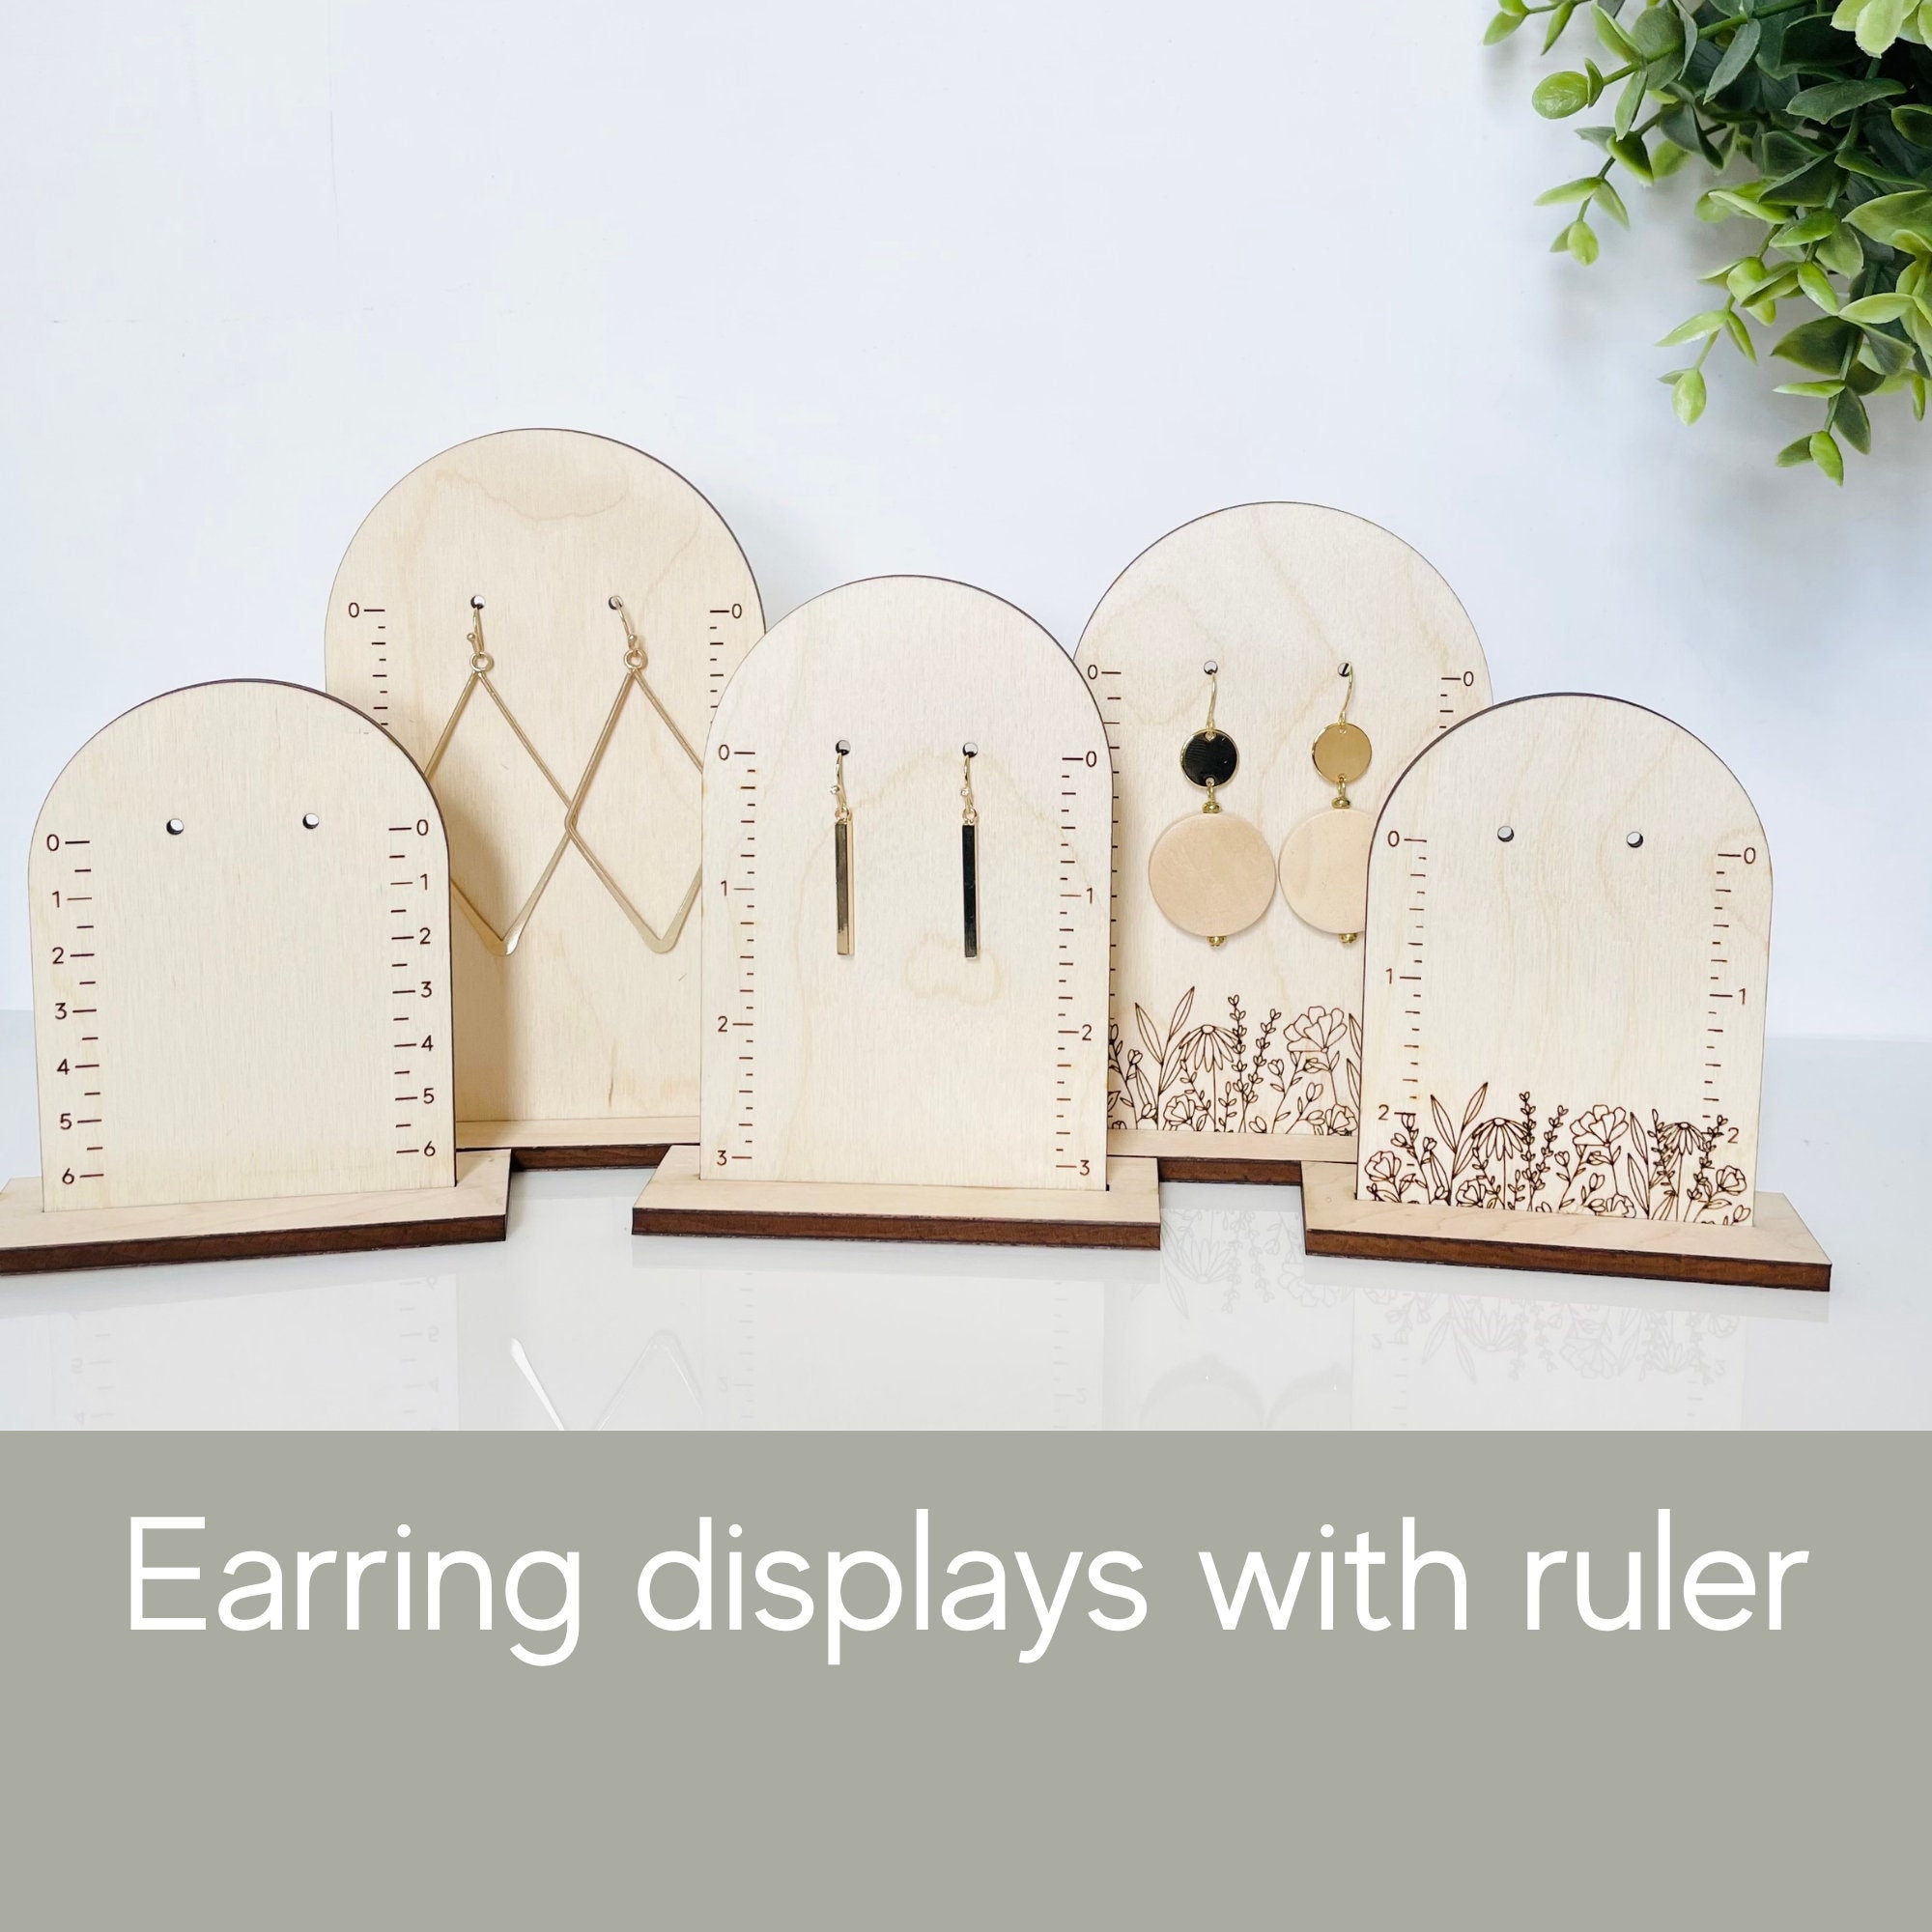 Poyilooo Earring Display Stands for Selling, Real Wood Jewelry Display for  Selling Vendors with Adversitsing Board, Large Capacity Earring Cards for